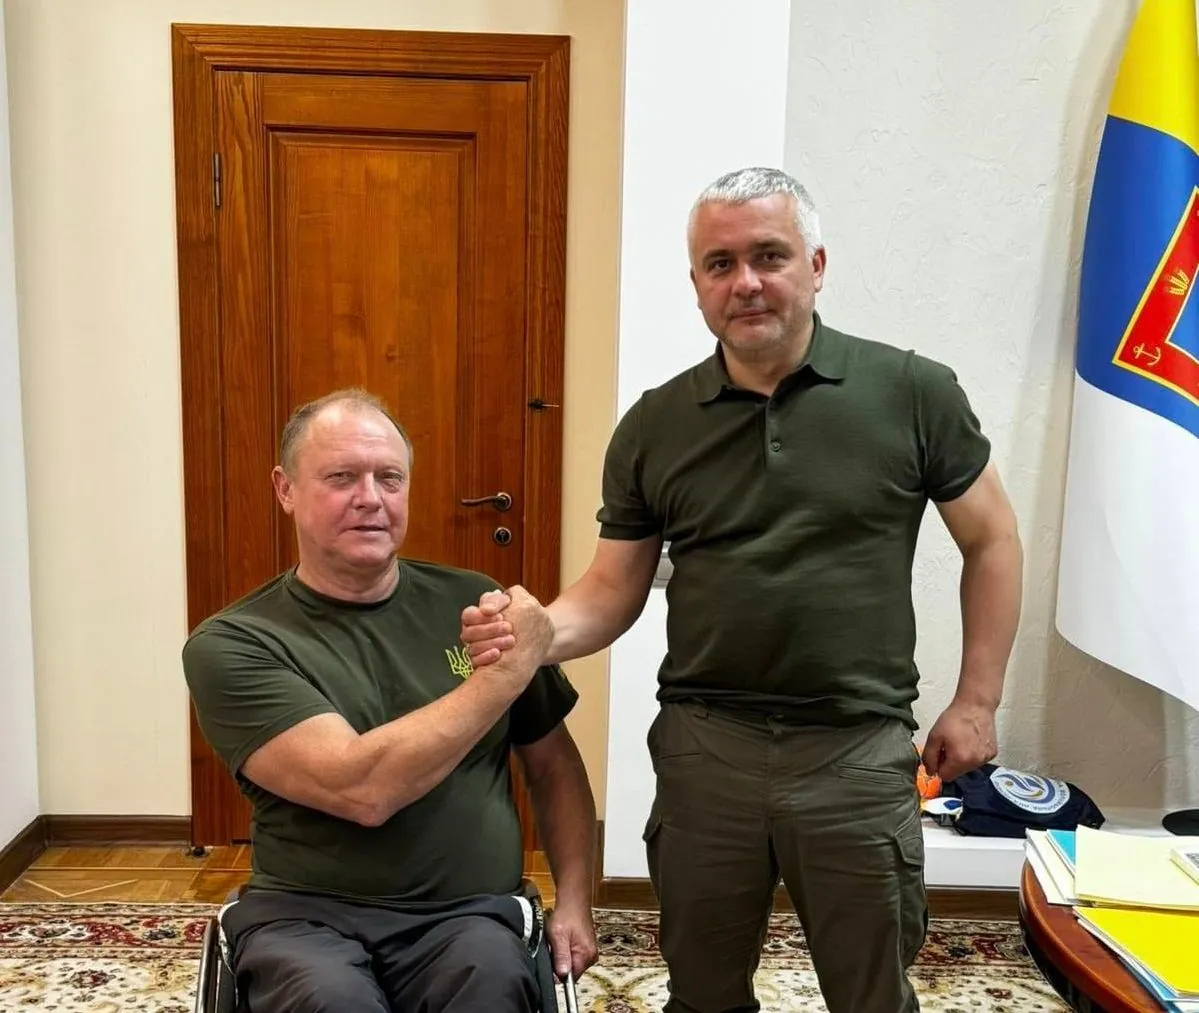 barrier-free-space-inclusion-and-sports-for-military-veterans-keeper-held-a-working-meeting-with-the-public-of-odessa-region